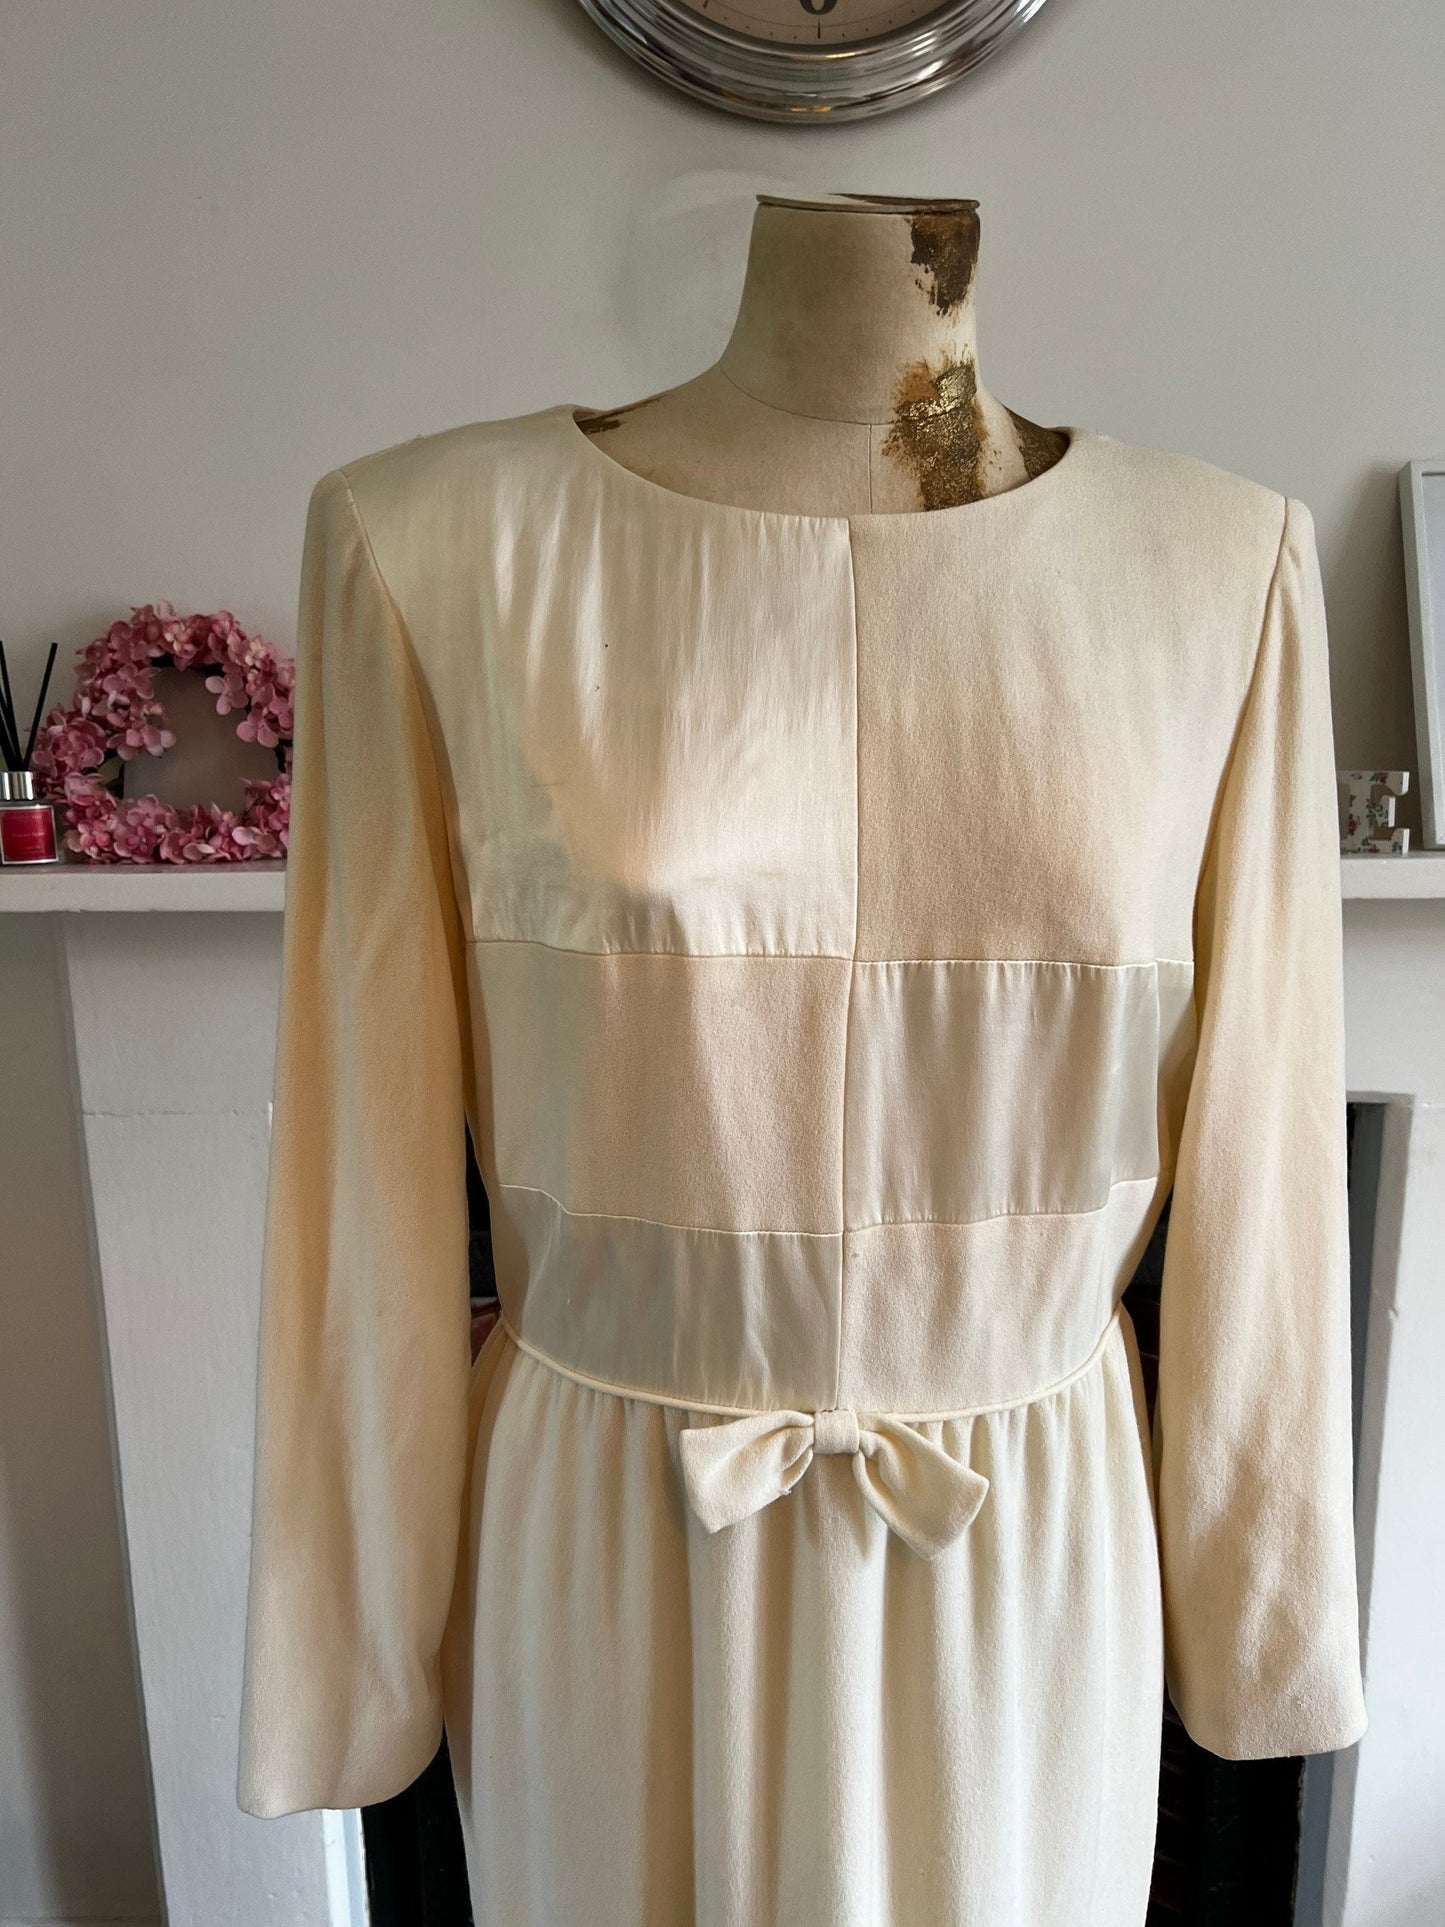 Cream Dress 80s Long sleeve wool and satin mad men dress - has marks and small holes